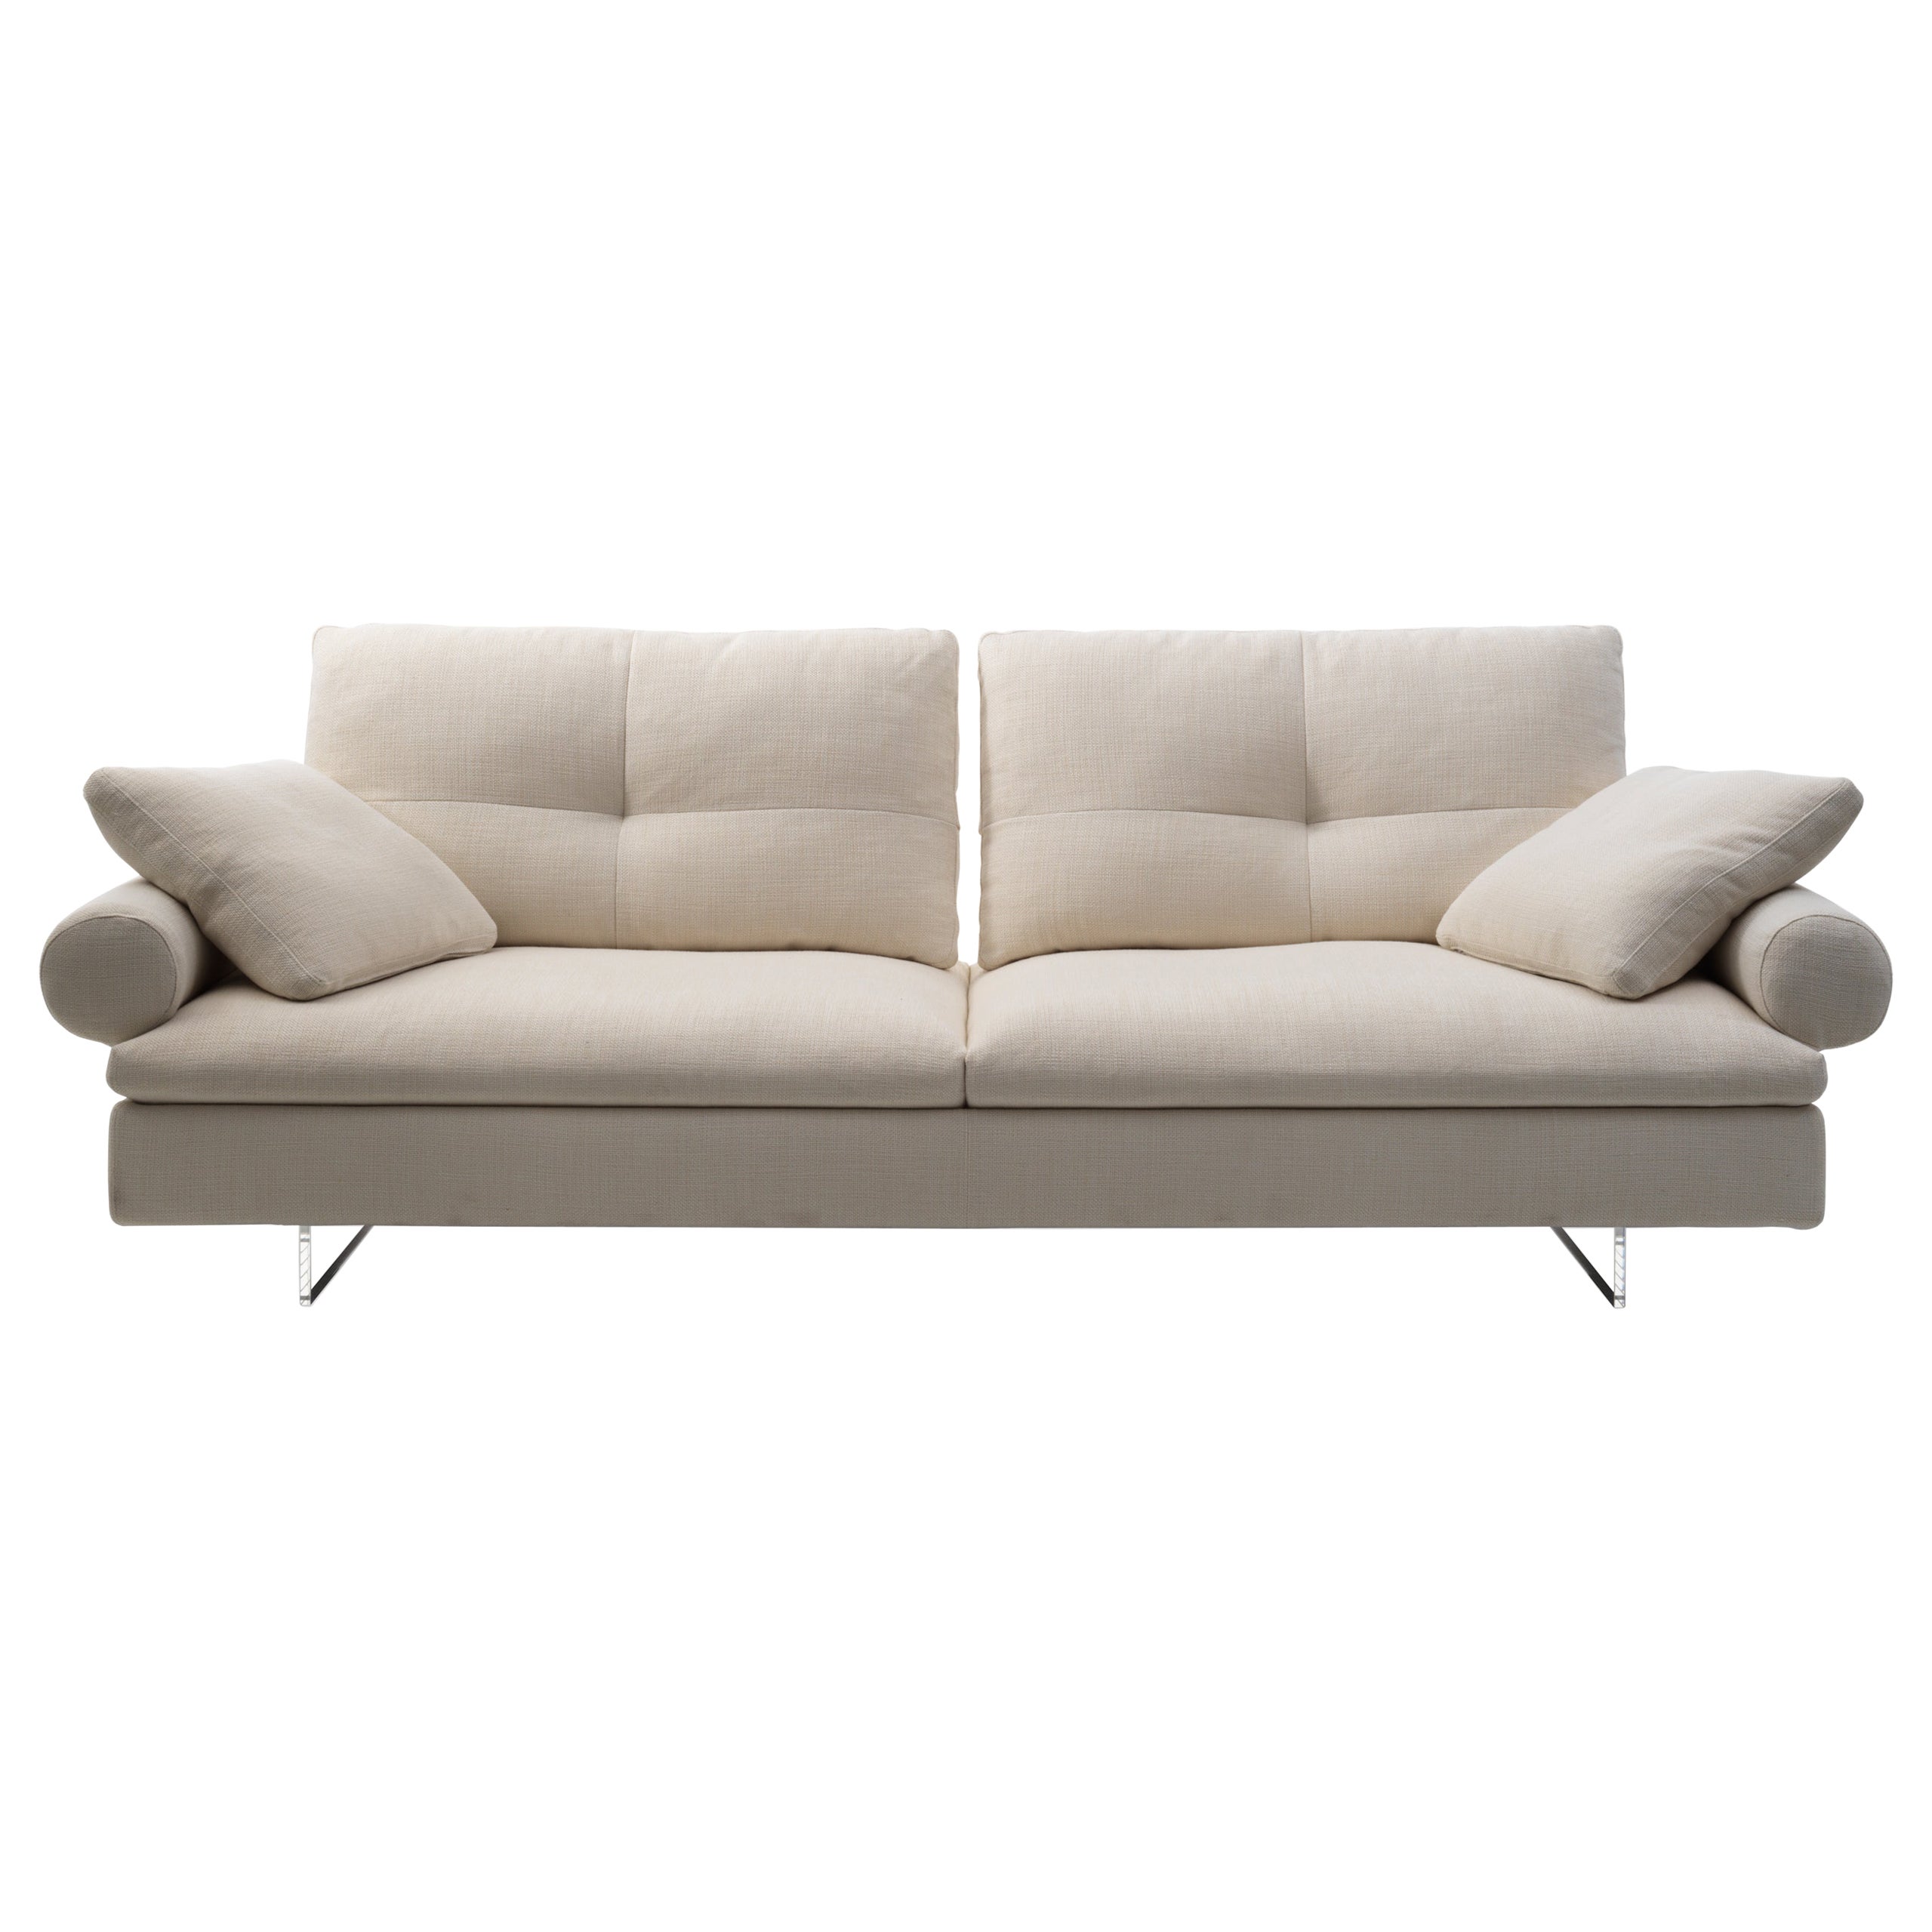 Limes New 88 Medium Sofa in Beige Upholstery with Roll Armrest by Sergio Bicego